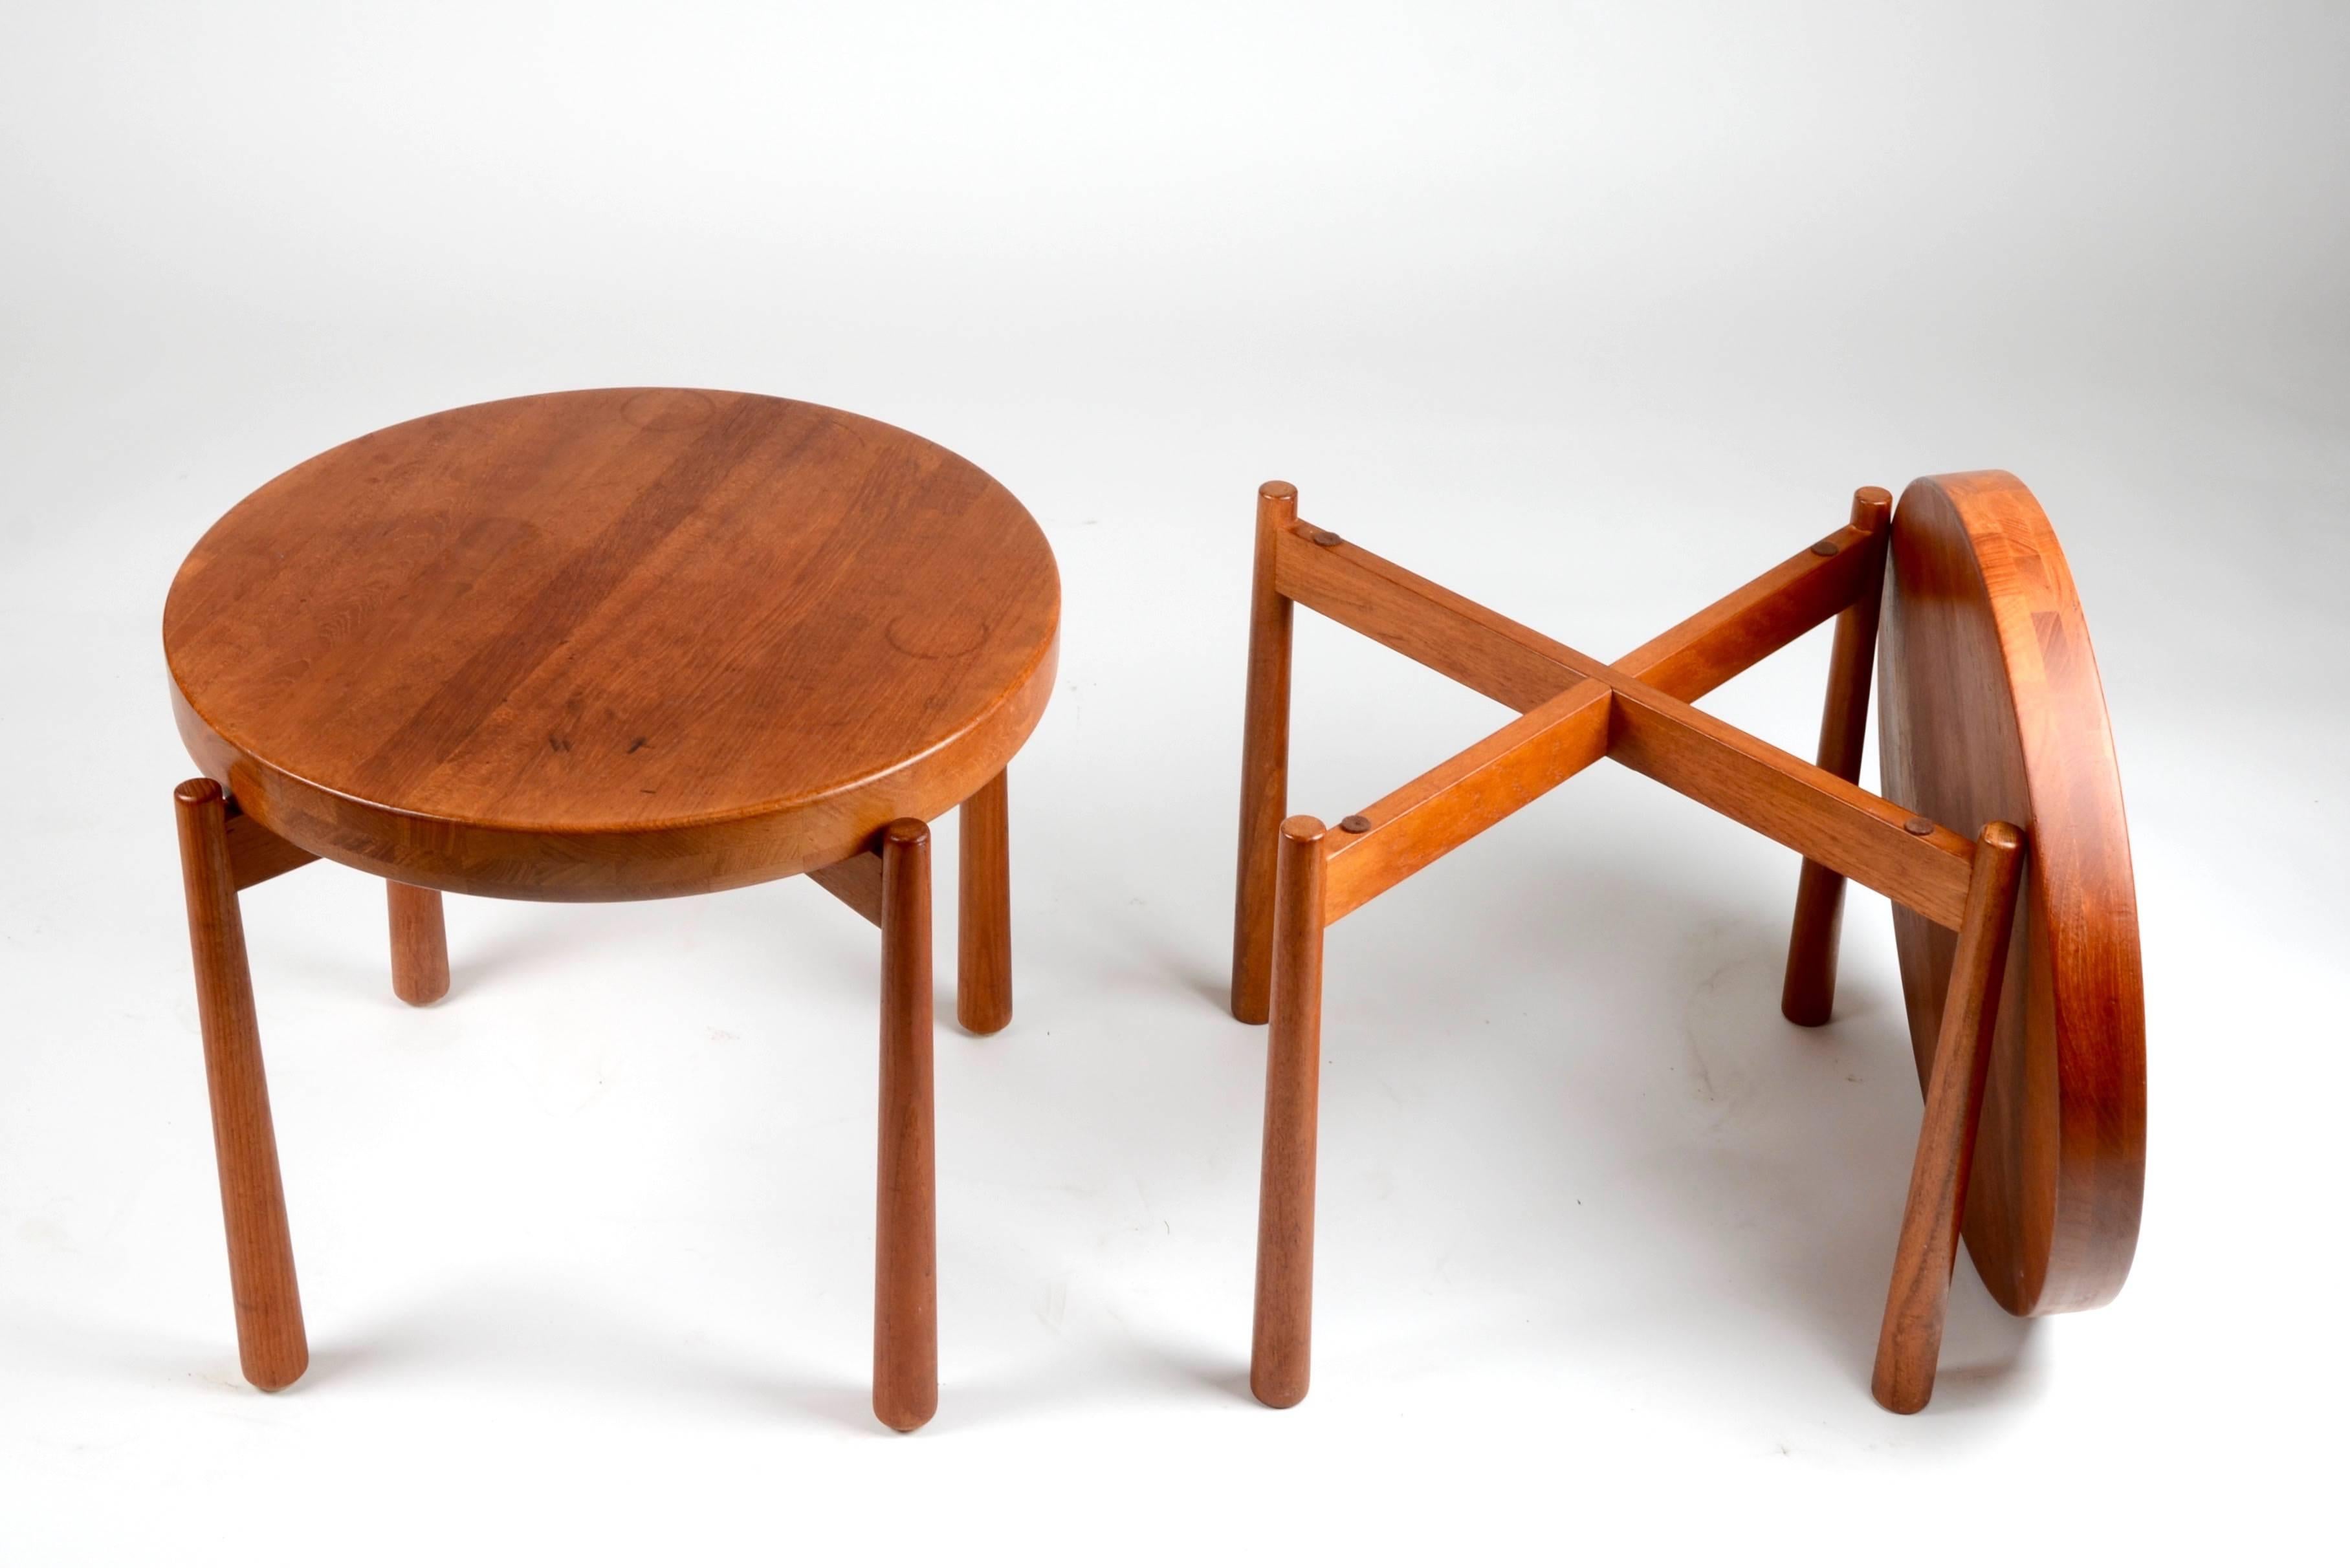 Pair of Tray Tables, in the Style of Jens Quistgaard, Denmark, Mid-1900s For Sale 1